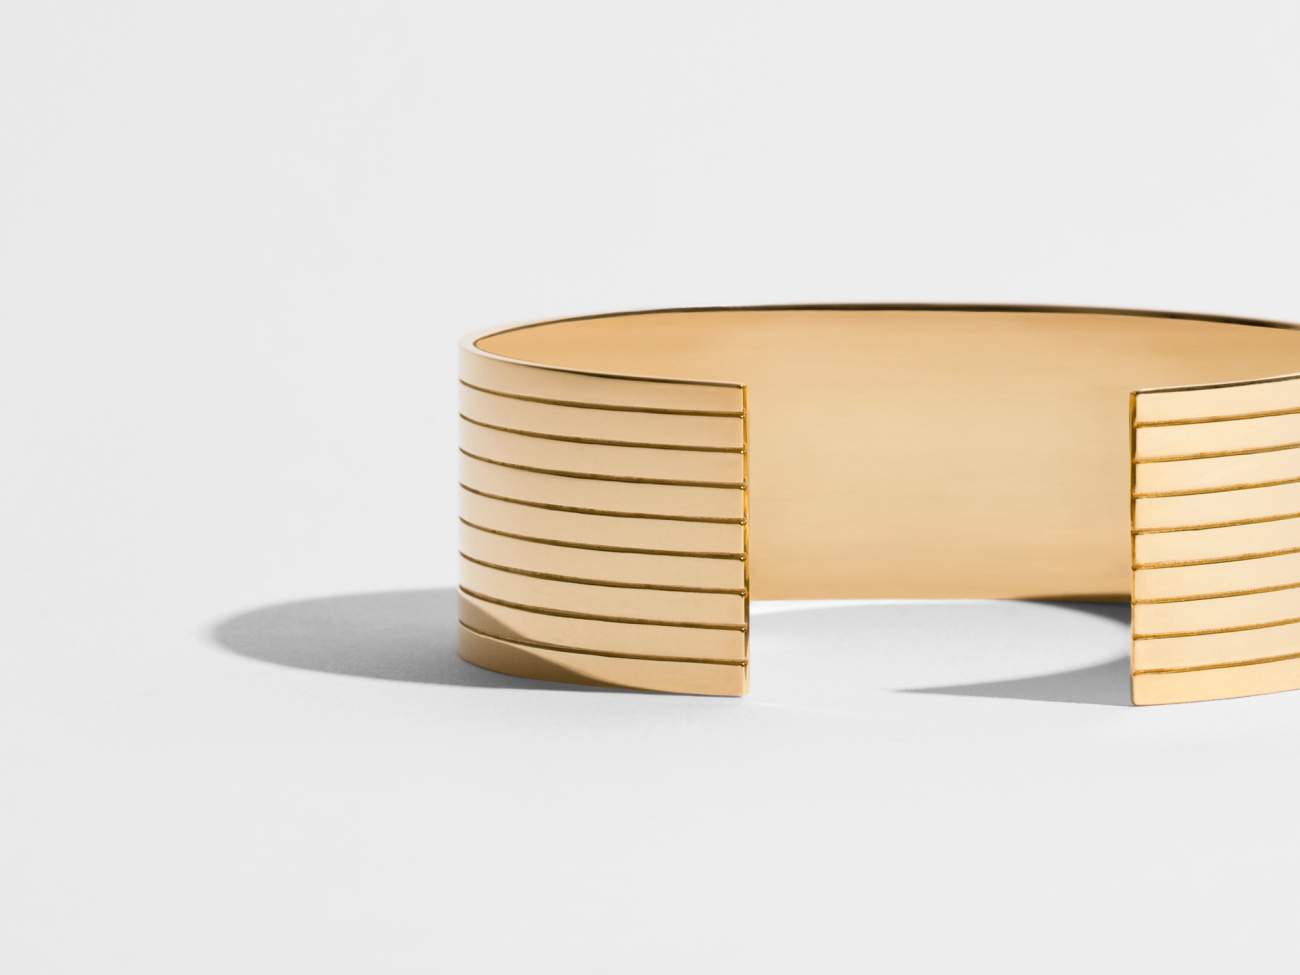 JEM_C07_BY04_collection_sillons_or_manchette_ethique_fairmined_ethical_gold_cuff-©Iris-Rey